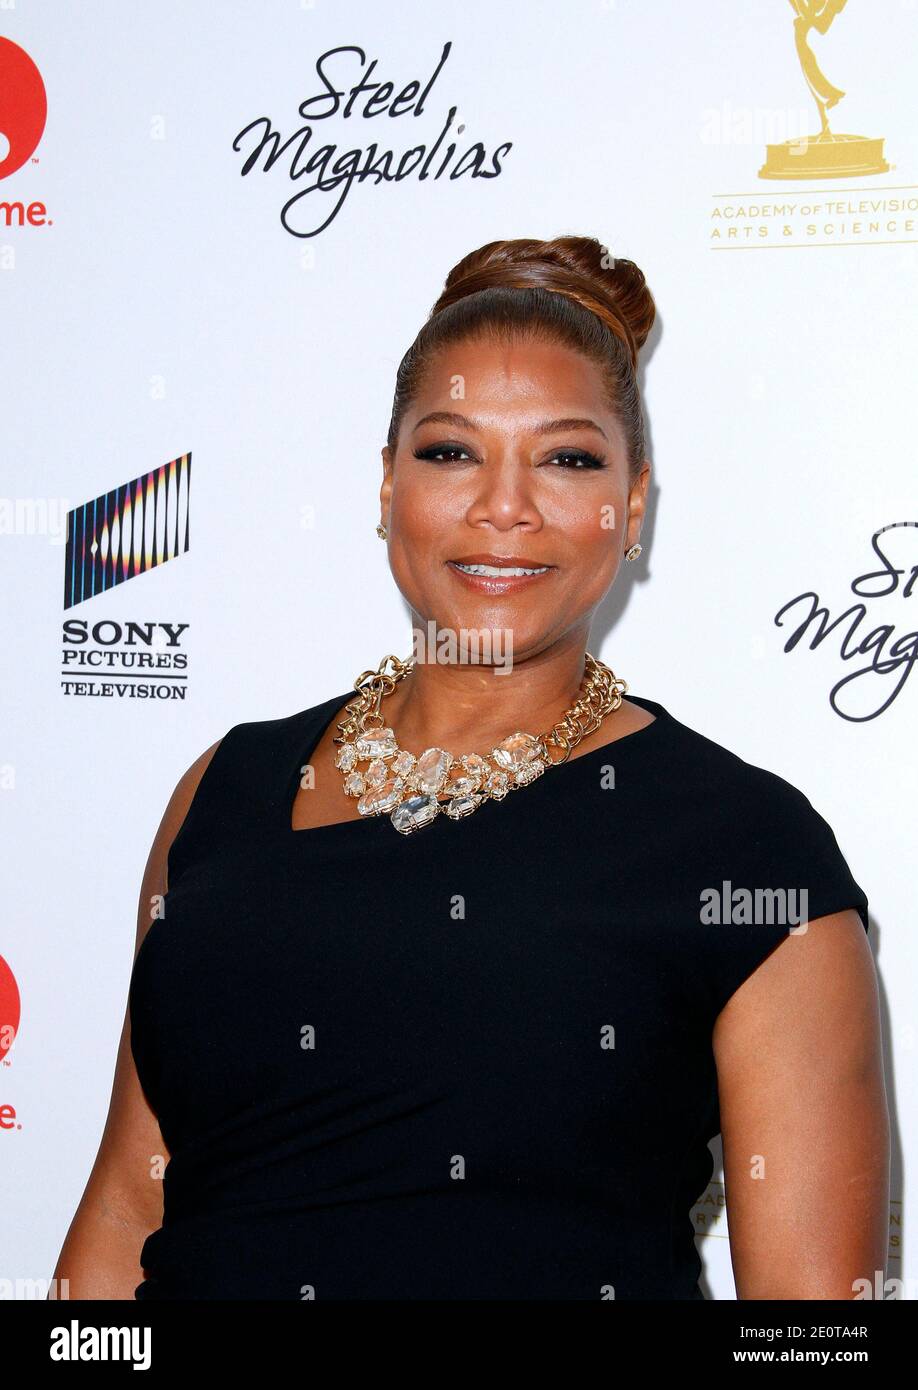 Queen Latifah attends the Steel Magnolias Premiere at the Paris Theater in New York City, NY, USA, on October 3, 2012. Photo by Donna Ward/ABACAPRESS.COM Stock Photo